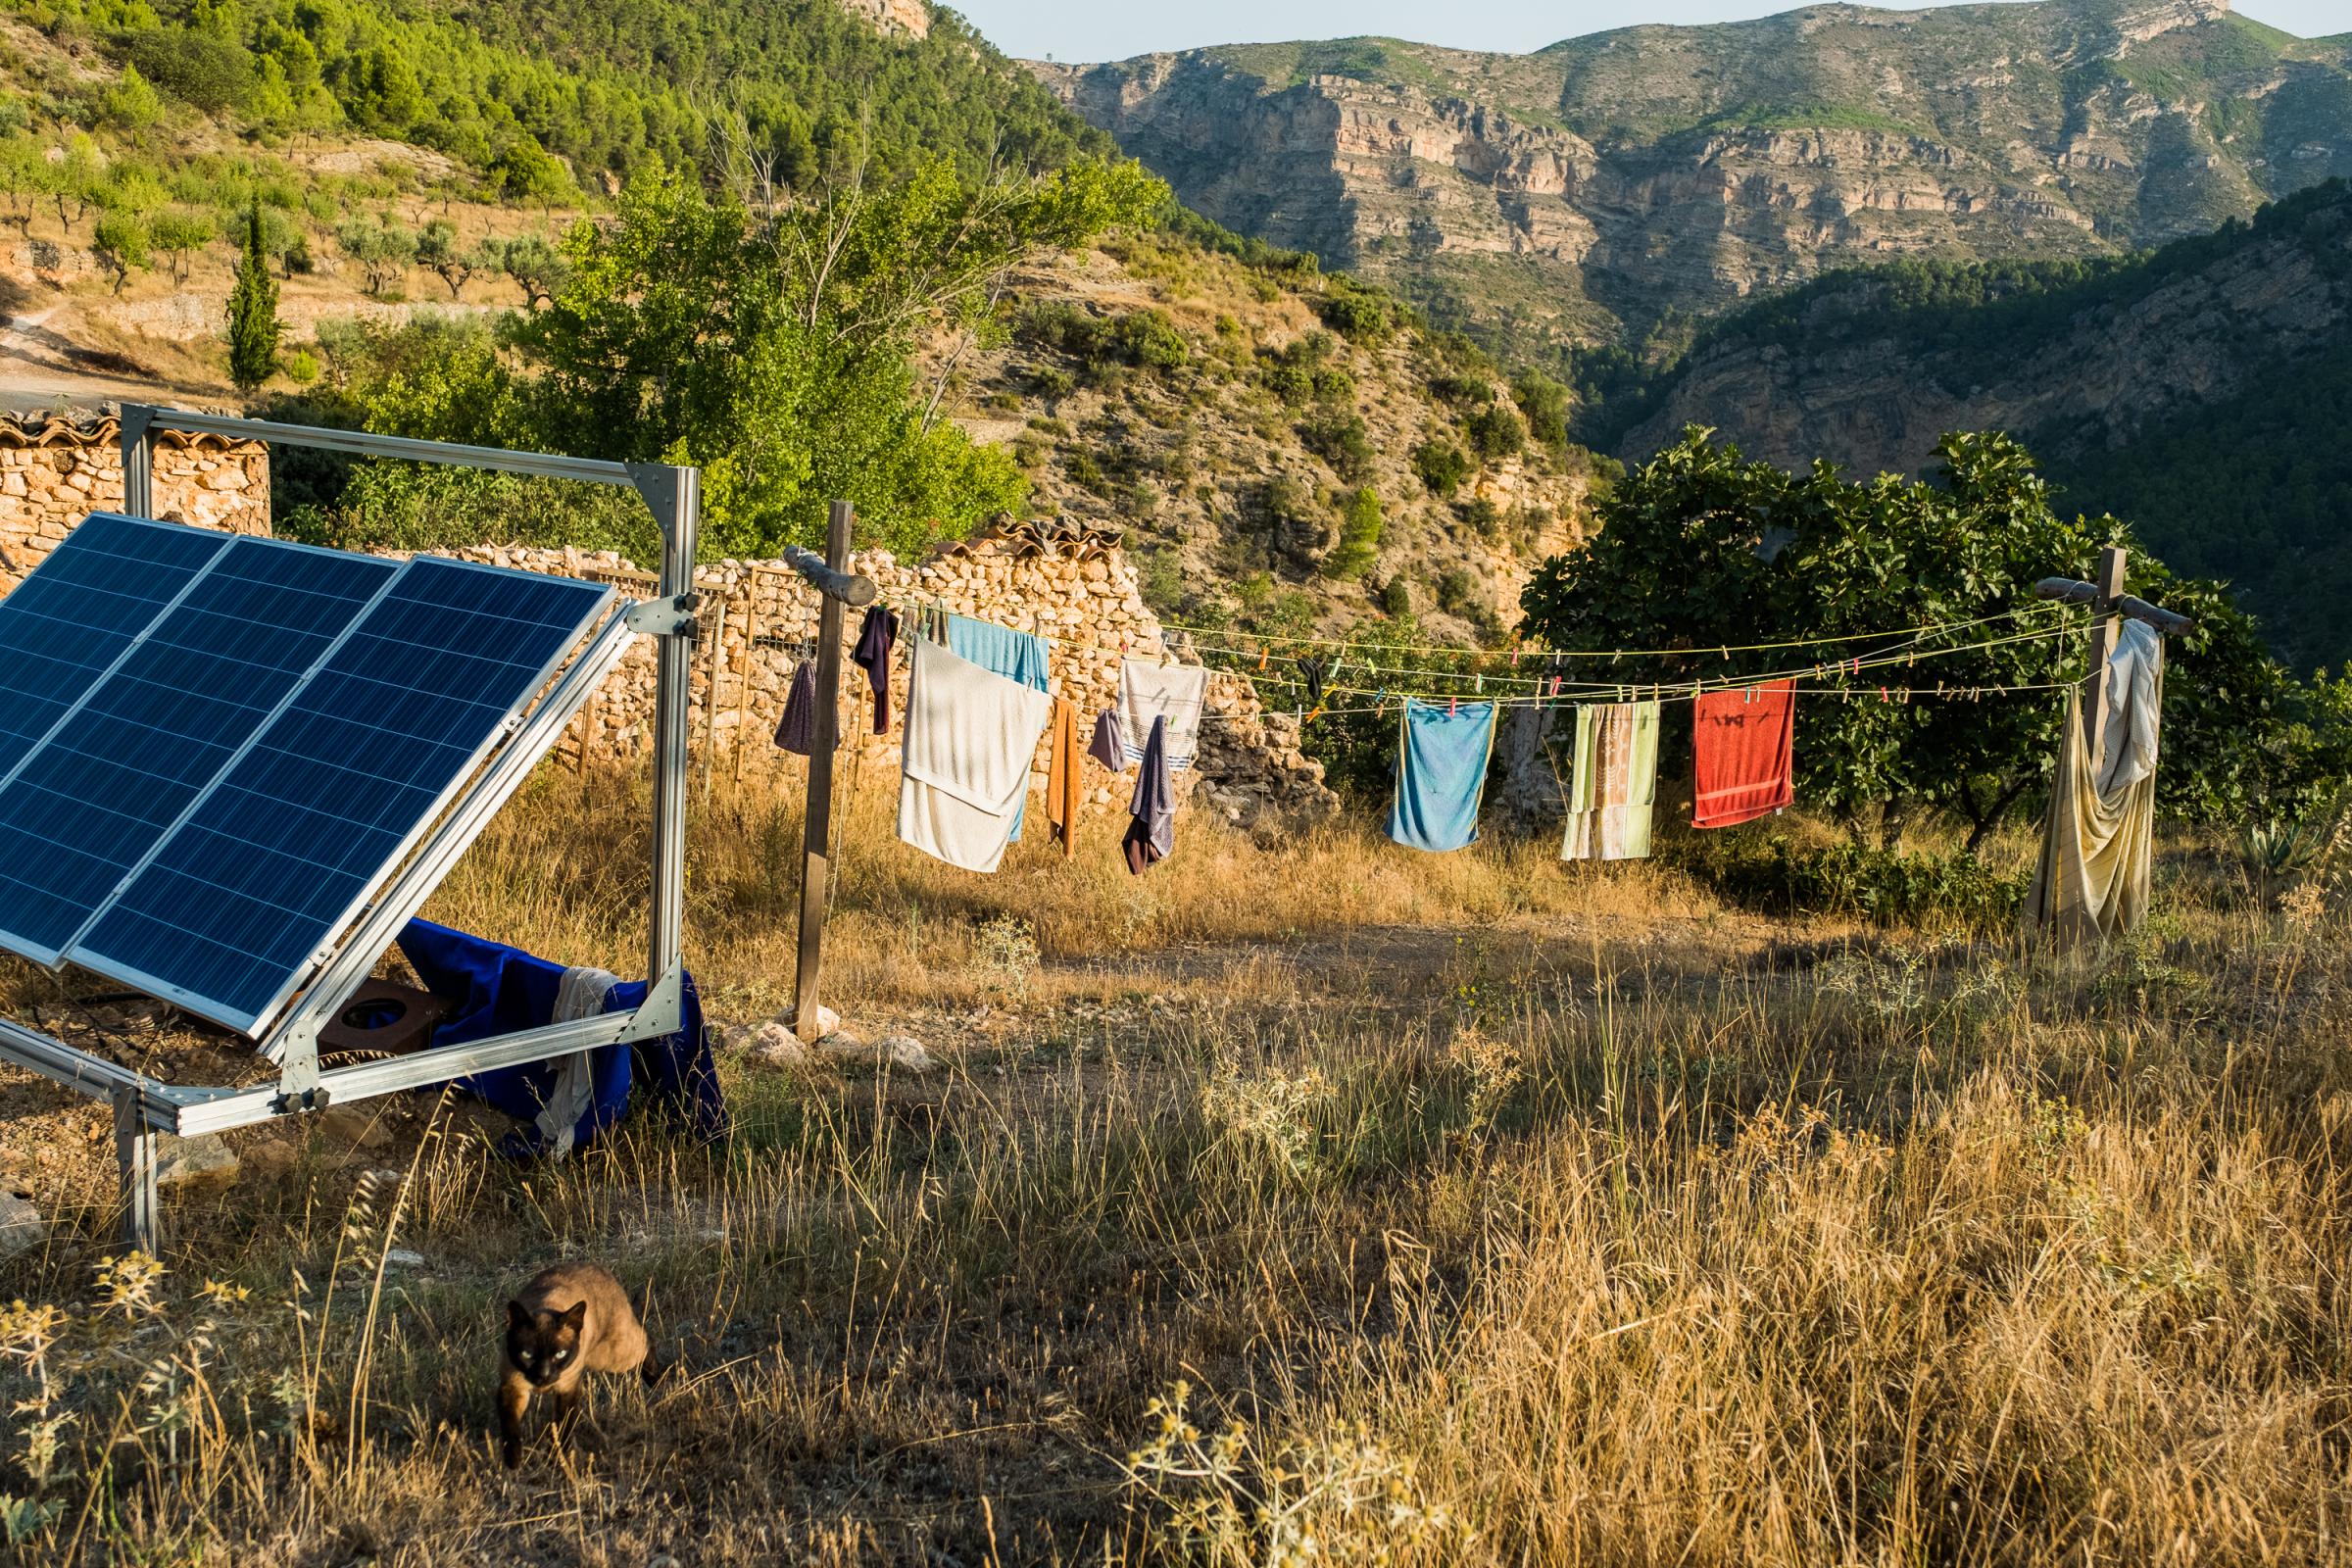 Rutopia - Wash is drying in the sun, close to the solar panels in...